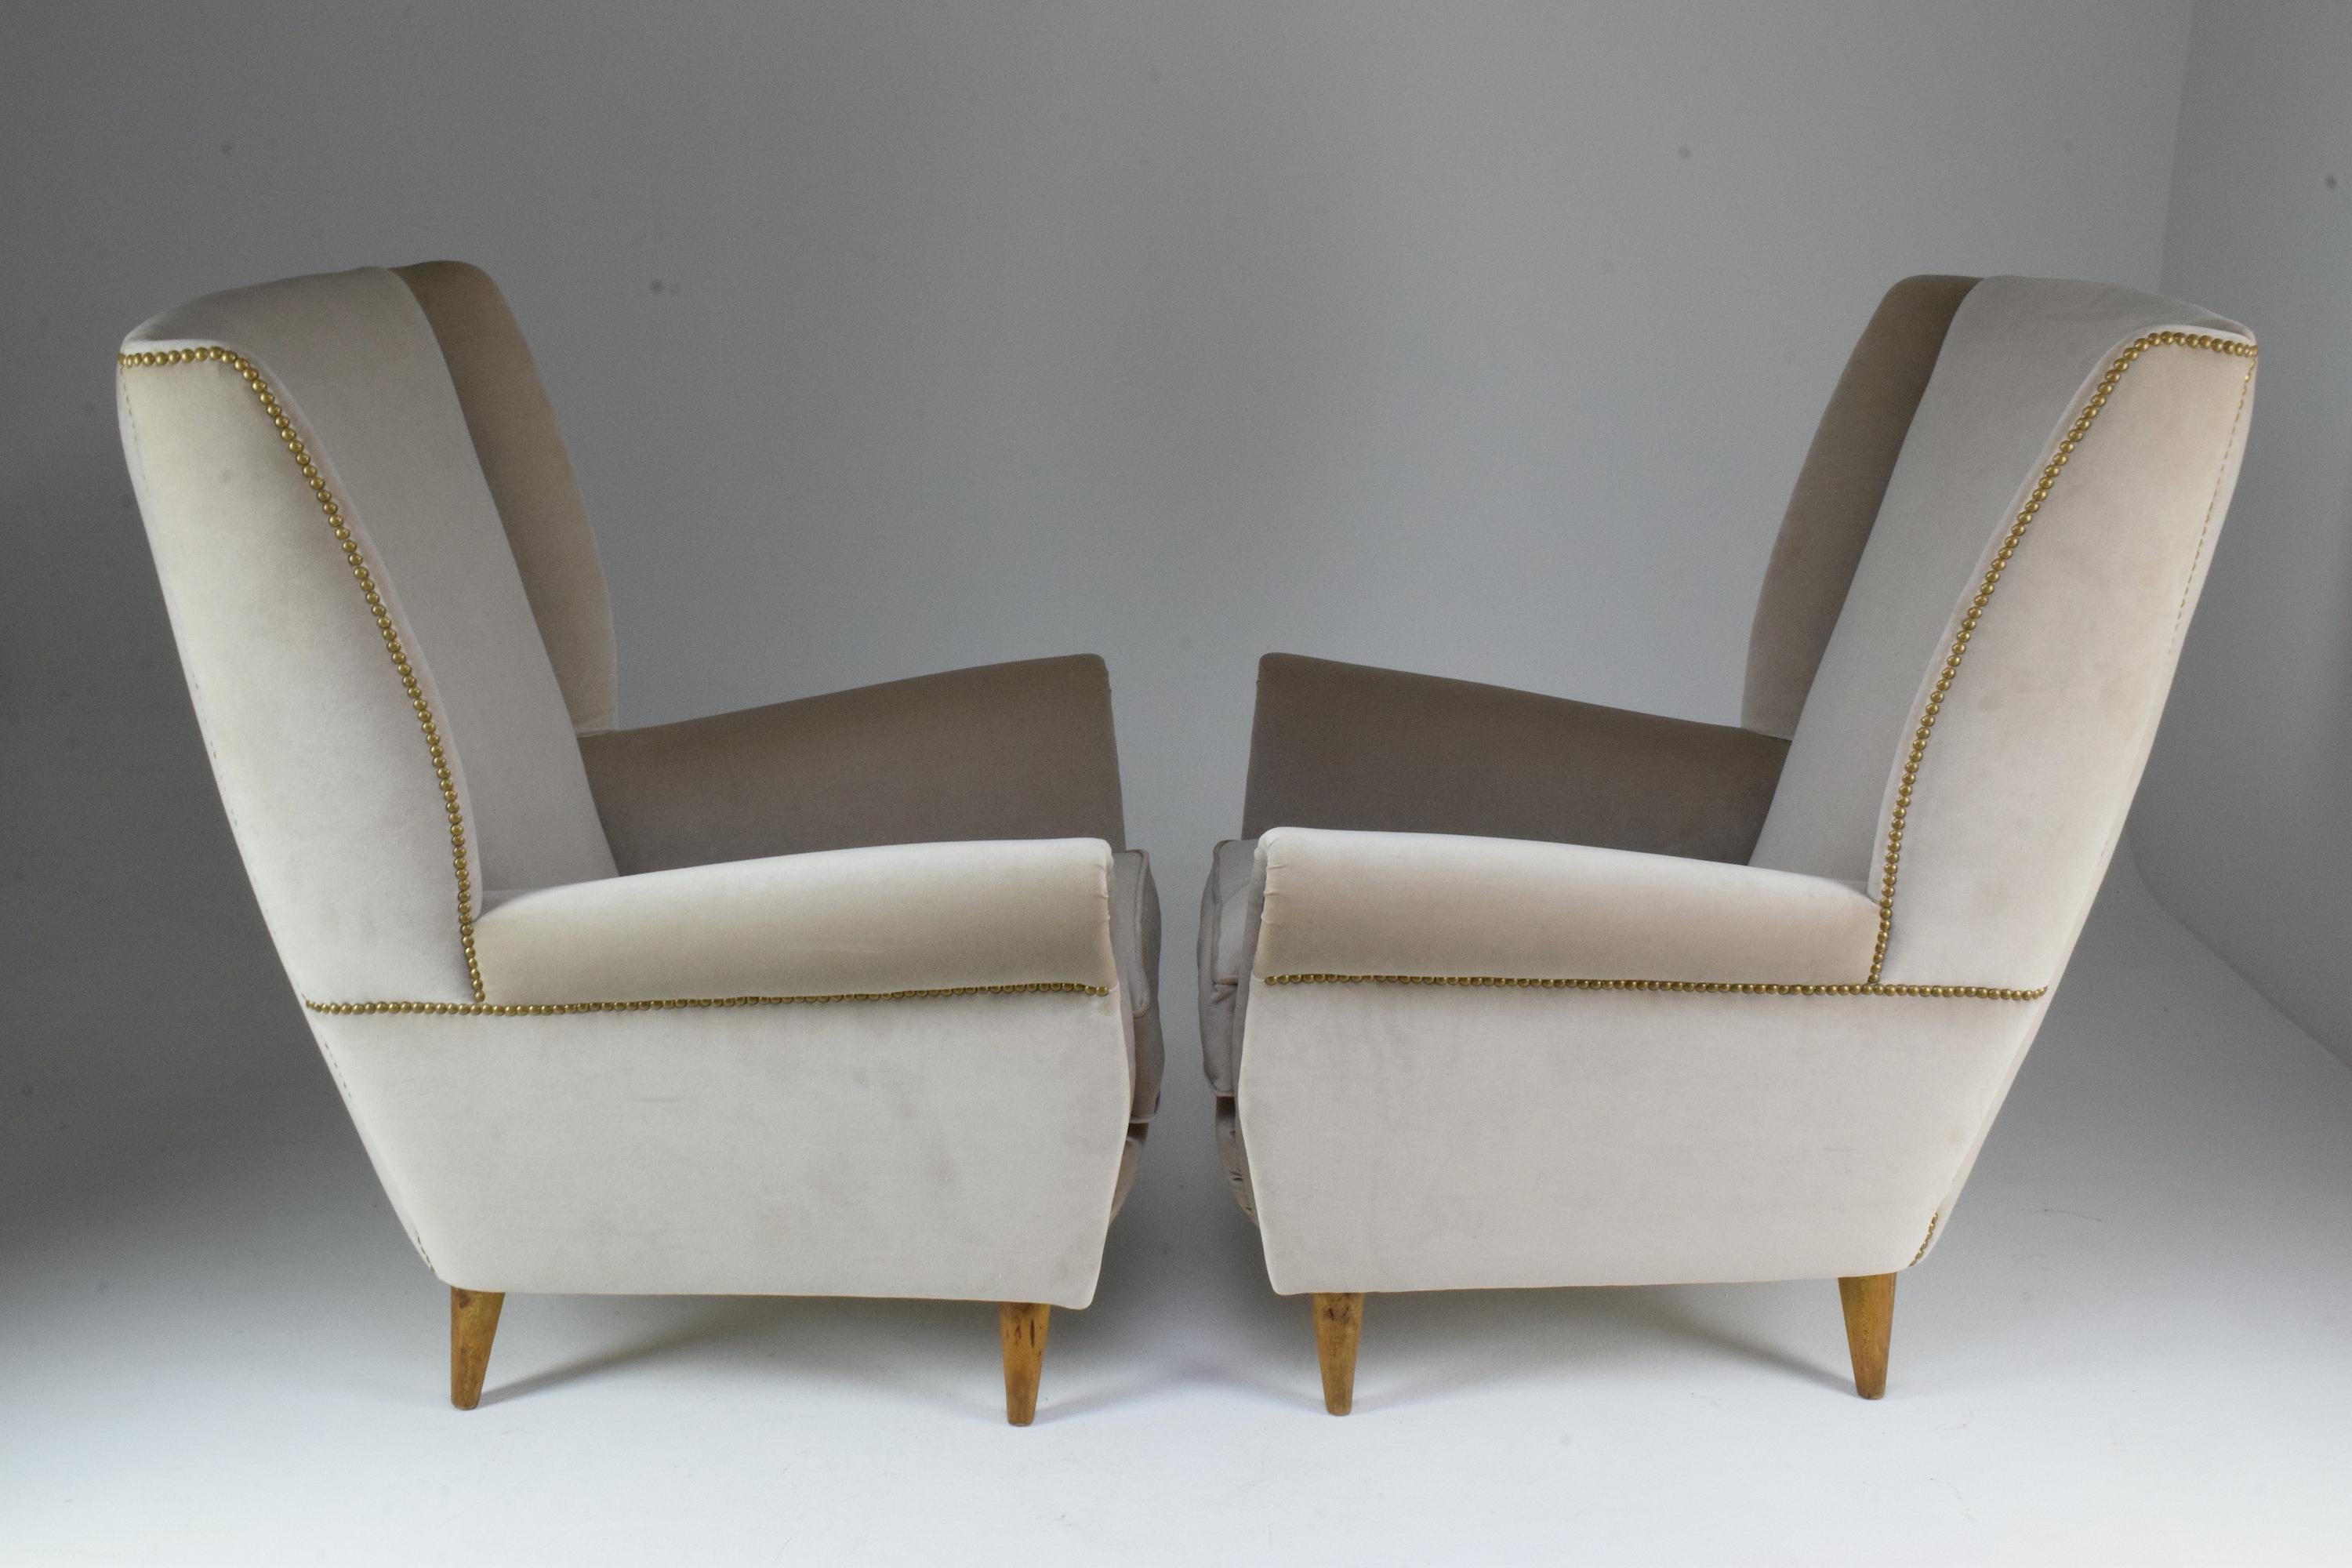 Pair of 20th Century Armchairs by Gio Ponti, 1940s For Sale 4